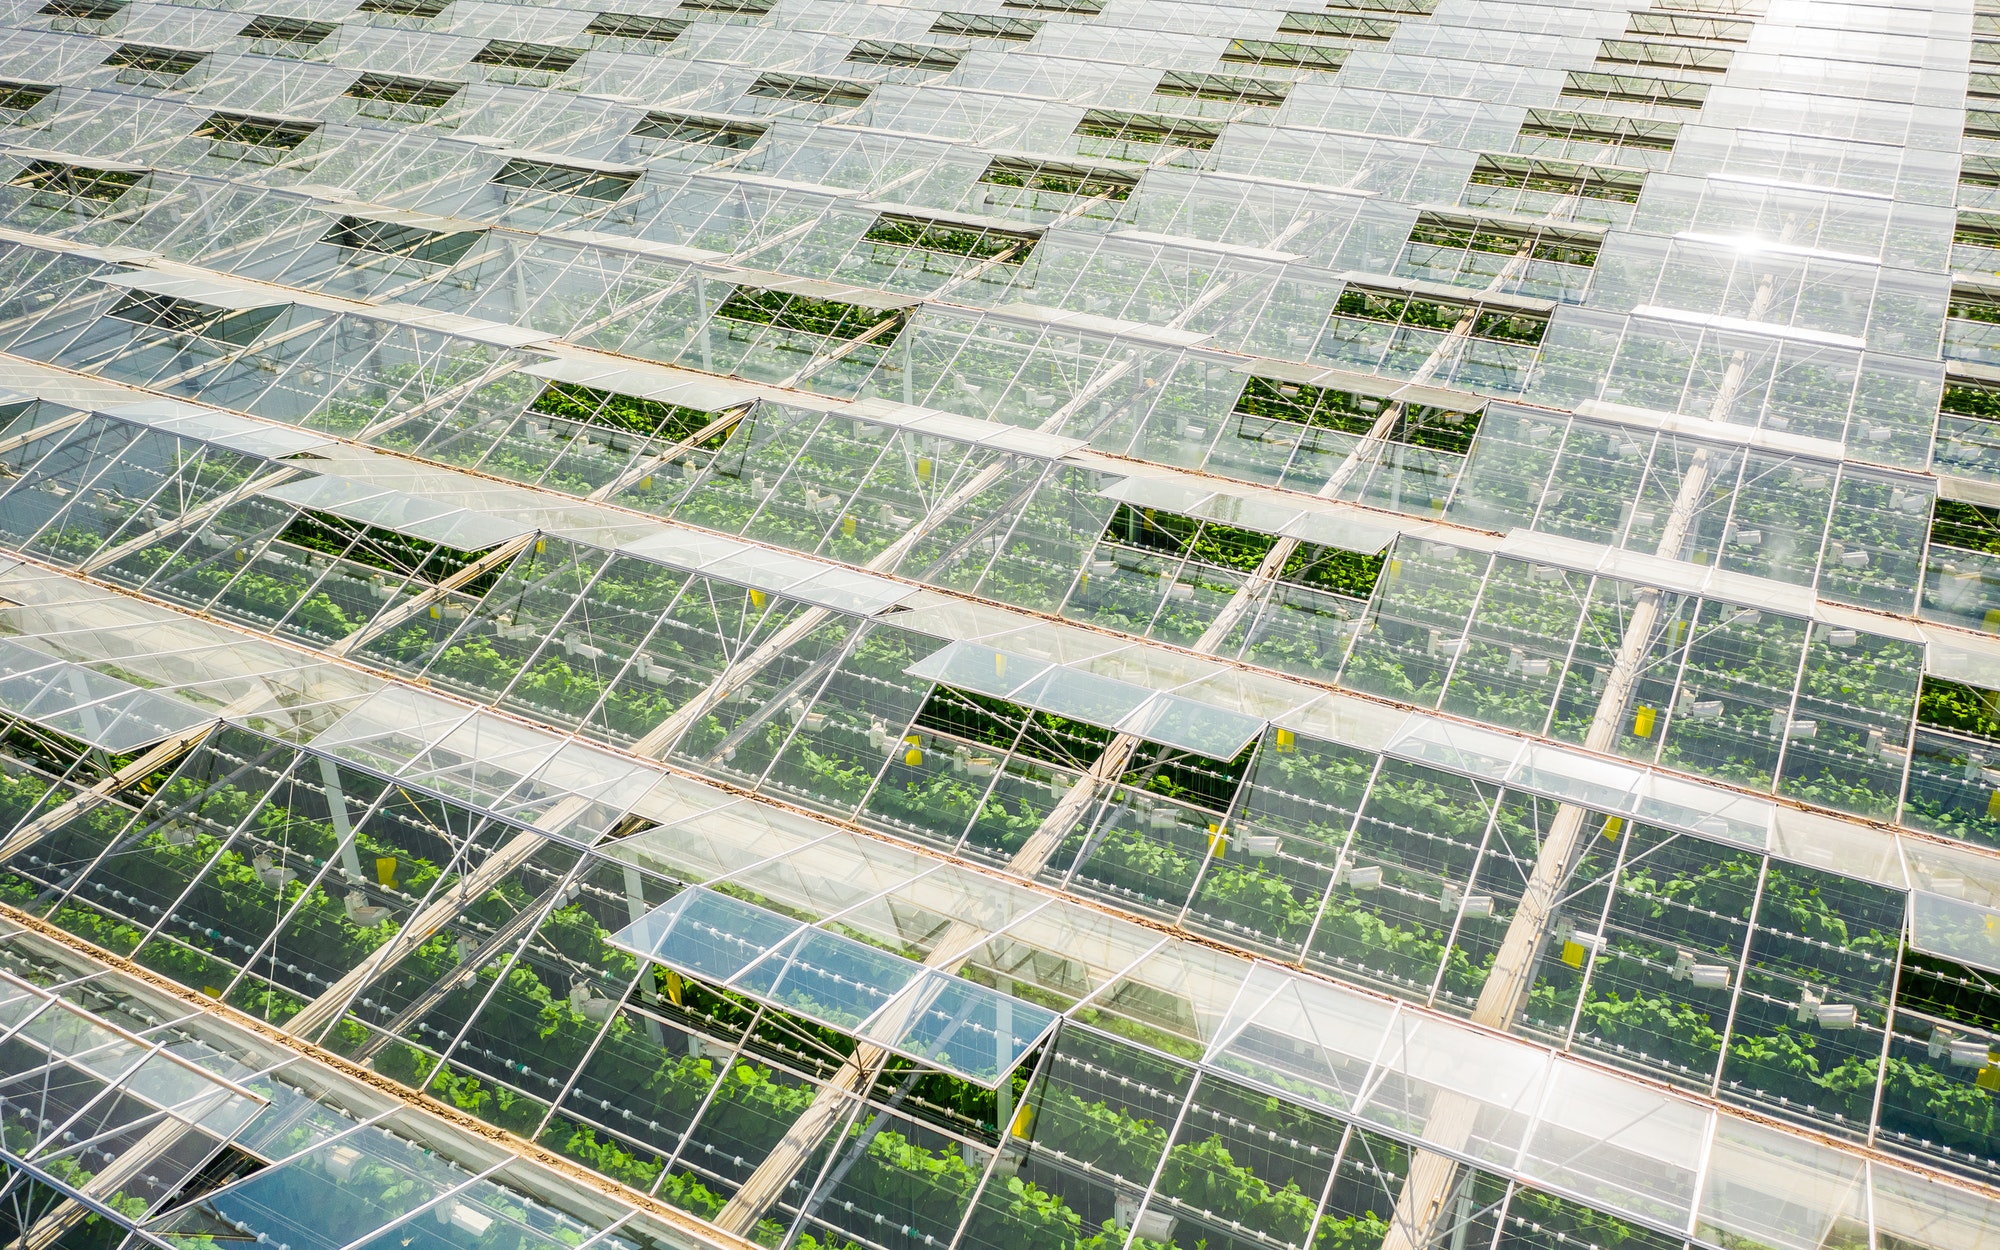 Greenhouses with vegetables